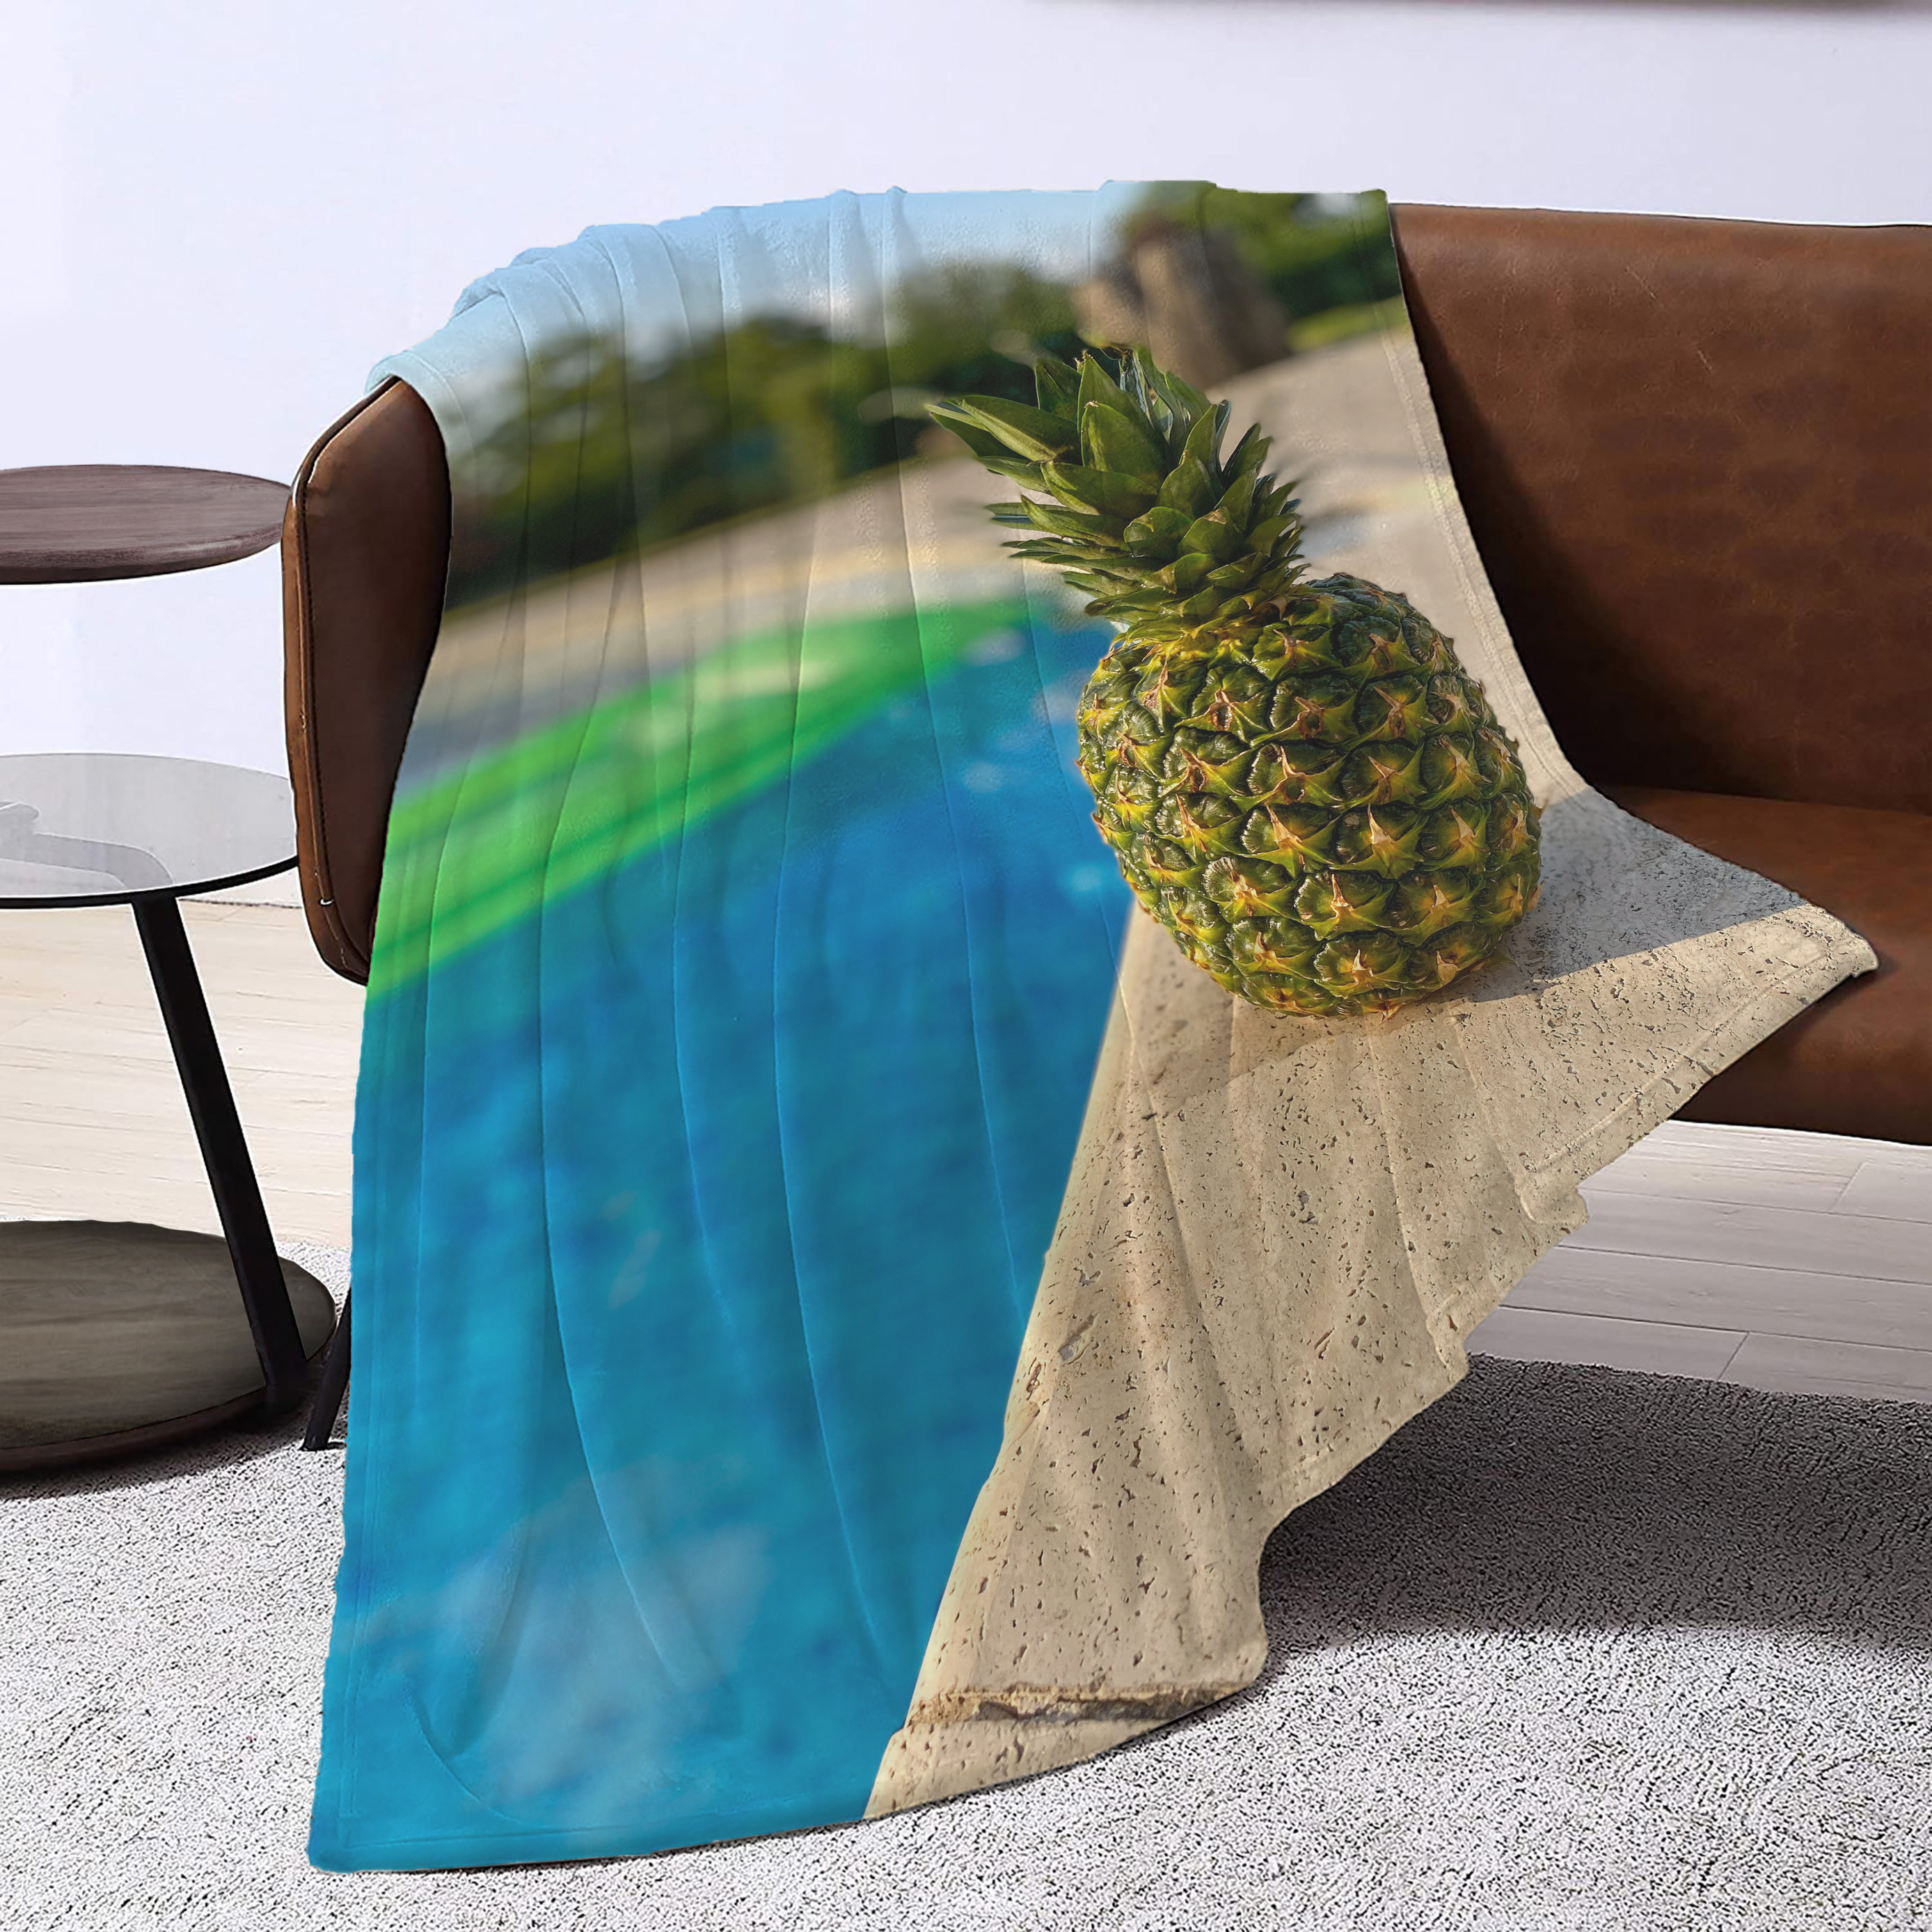 Pineapple Colorful Fleece Blanket Throw Super Soft Cozy Couch Blanket Lightweight Warm Bed Blanket for Sofa Bed Travel Camping 